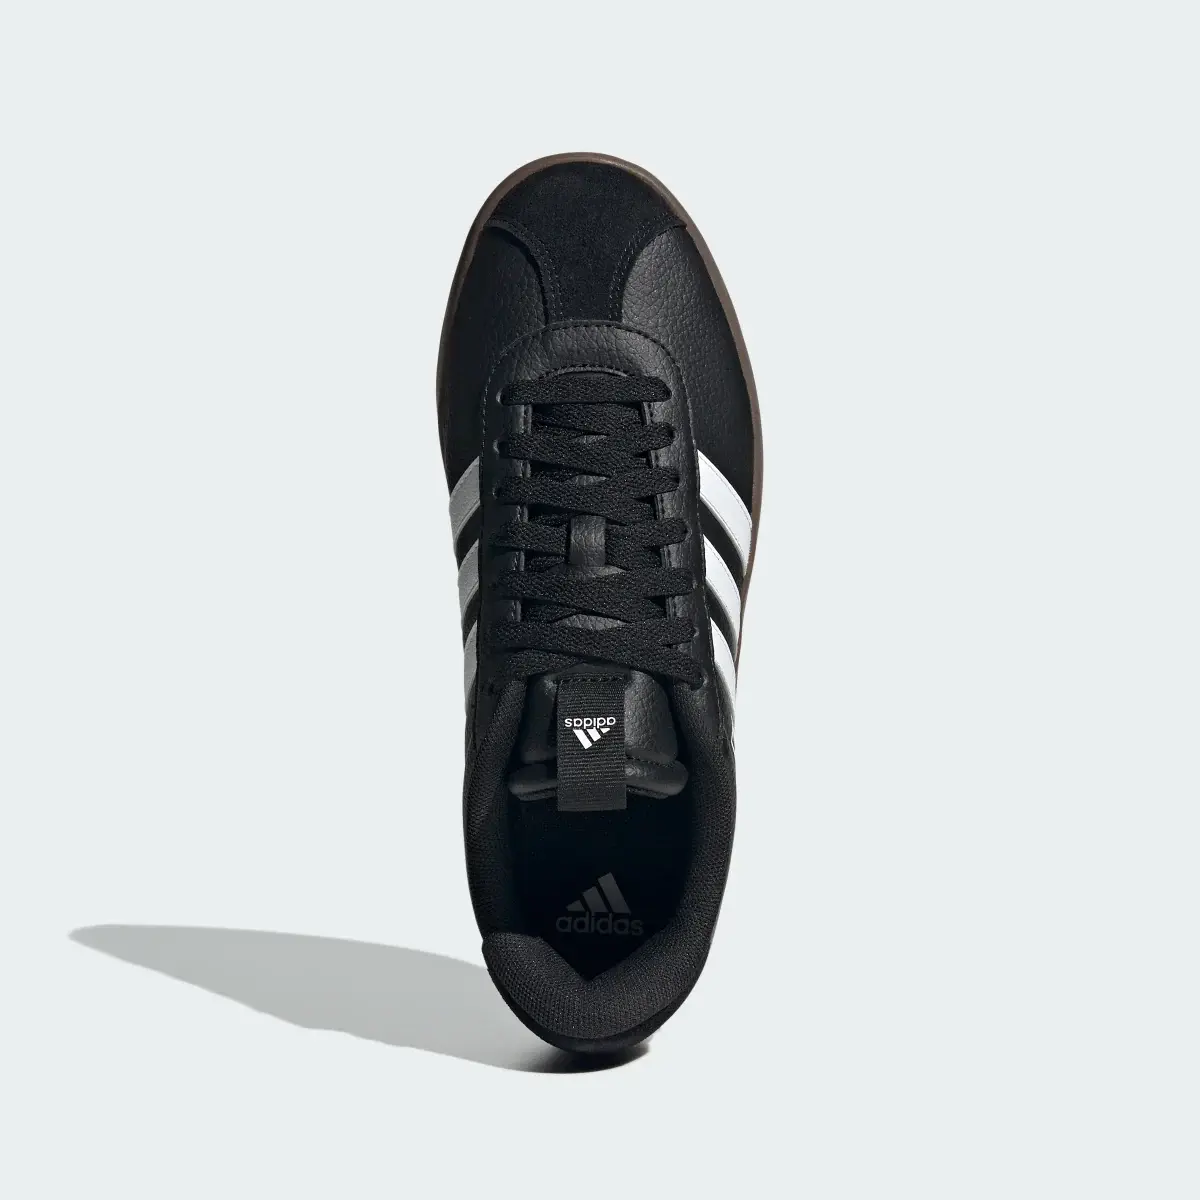 Adidas VL Court 3.0 Low Skateboarding Shoes - ID8796